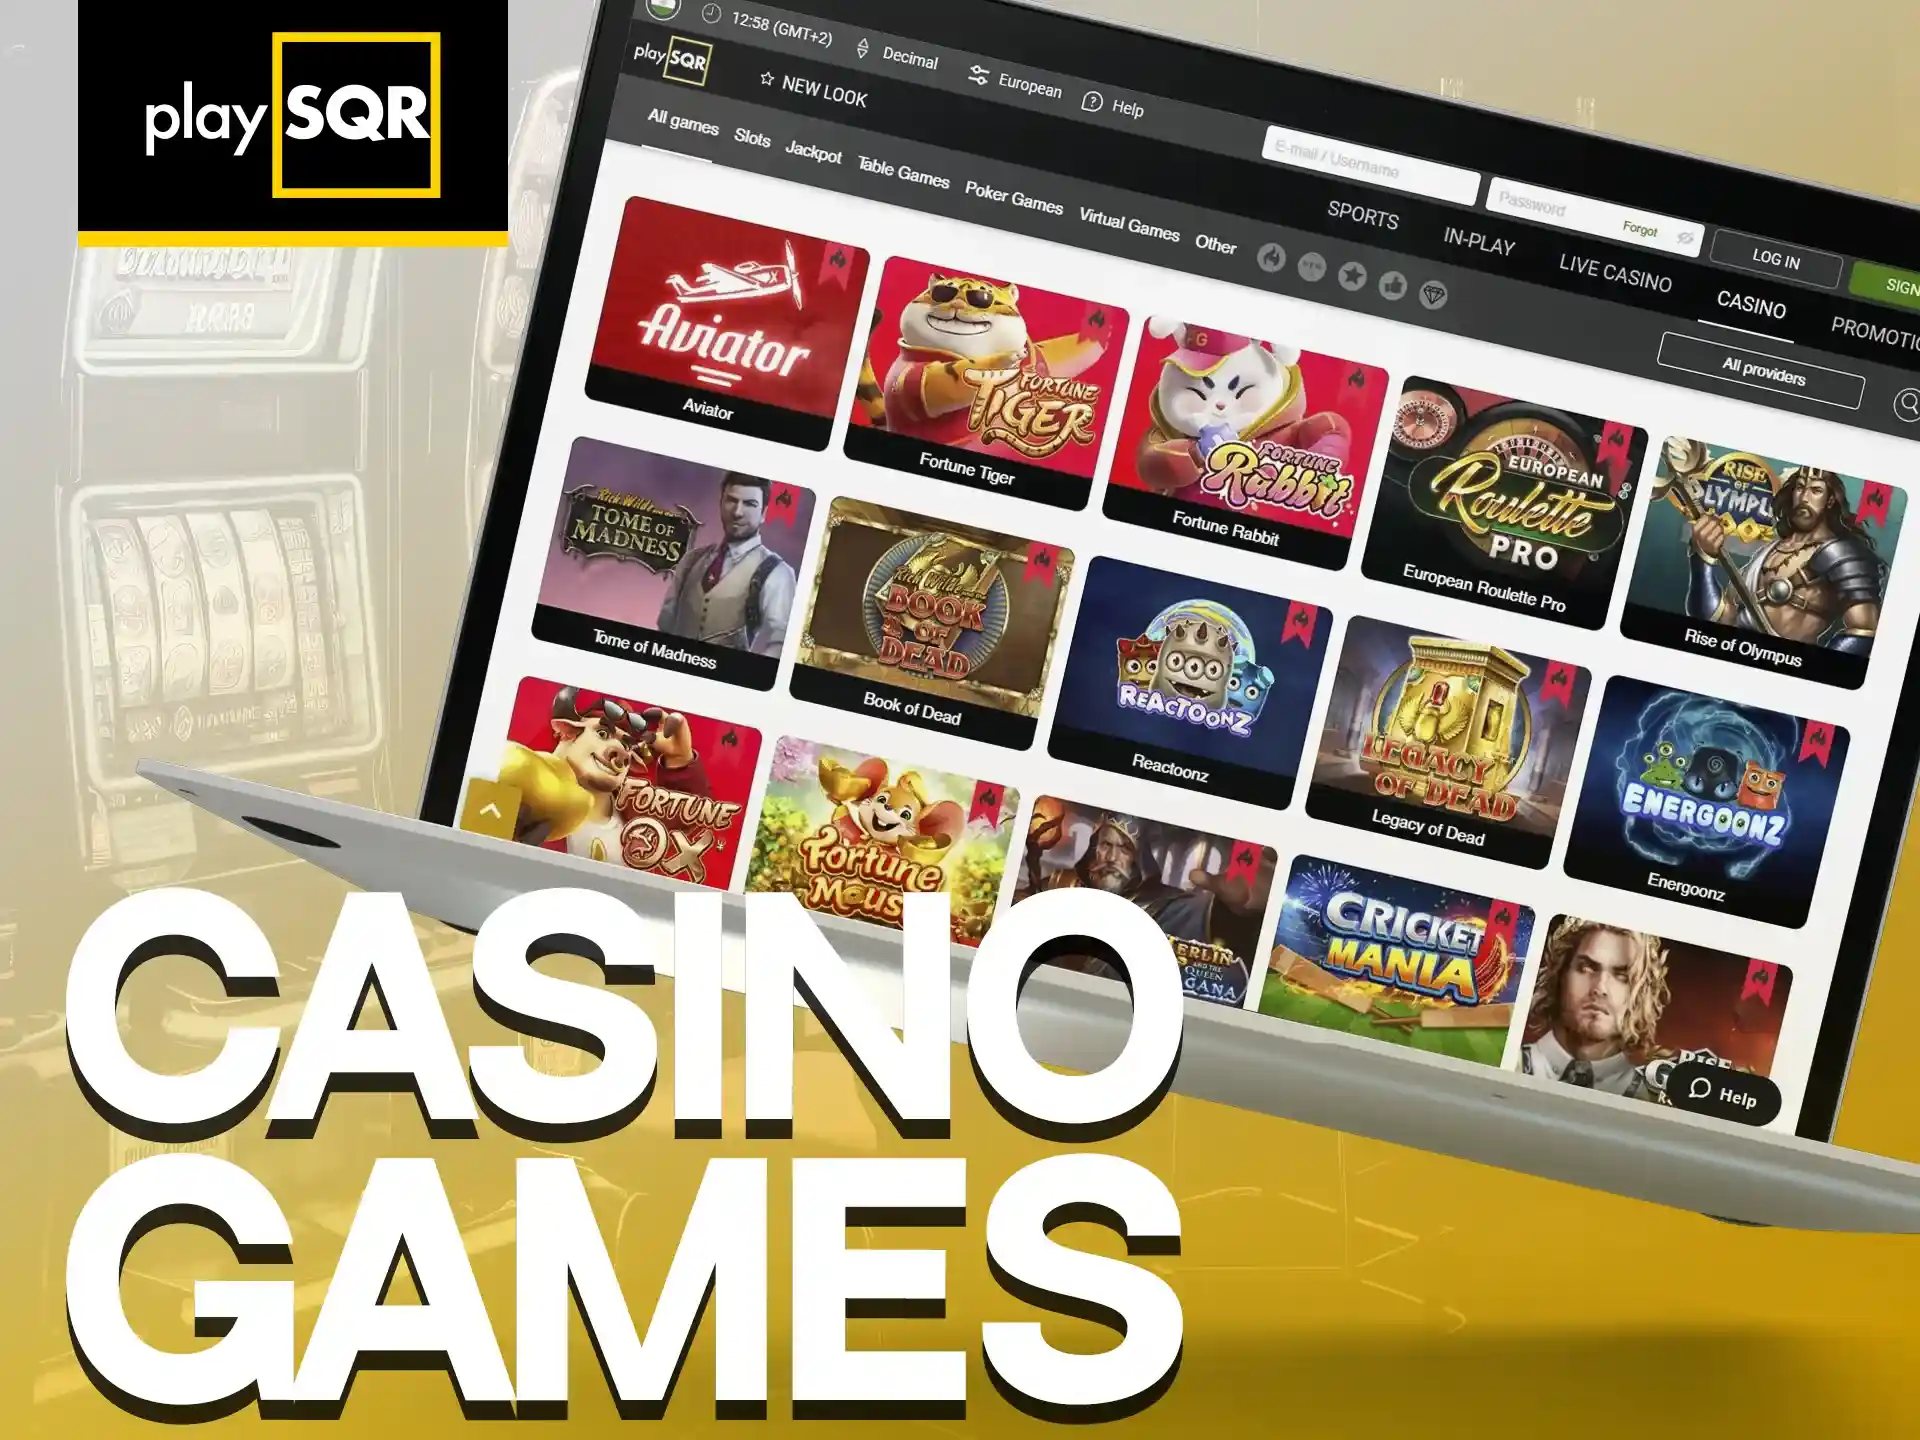 PlaySQR Casino offers classic and popular games.